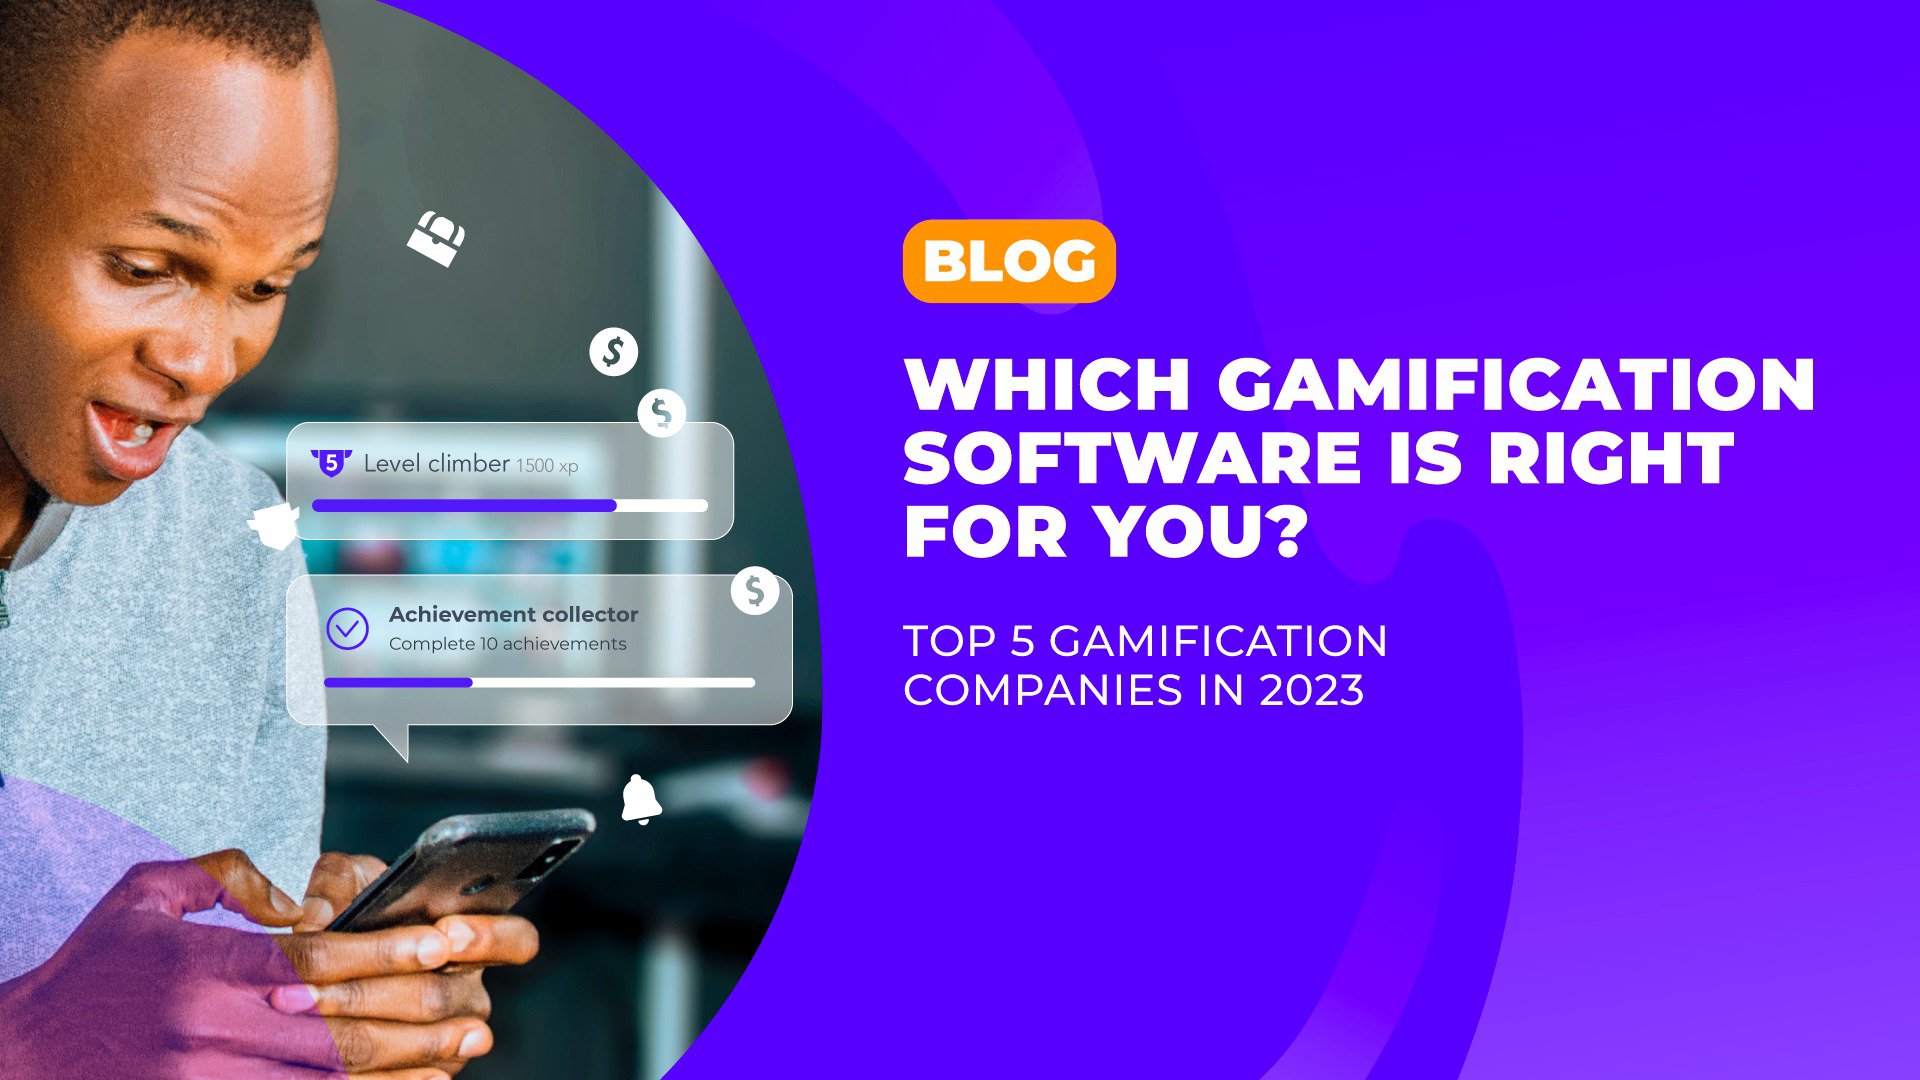 Which gamification software is right for you? Top 5 gamification companies in 2023 cover